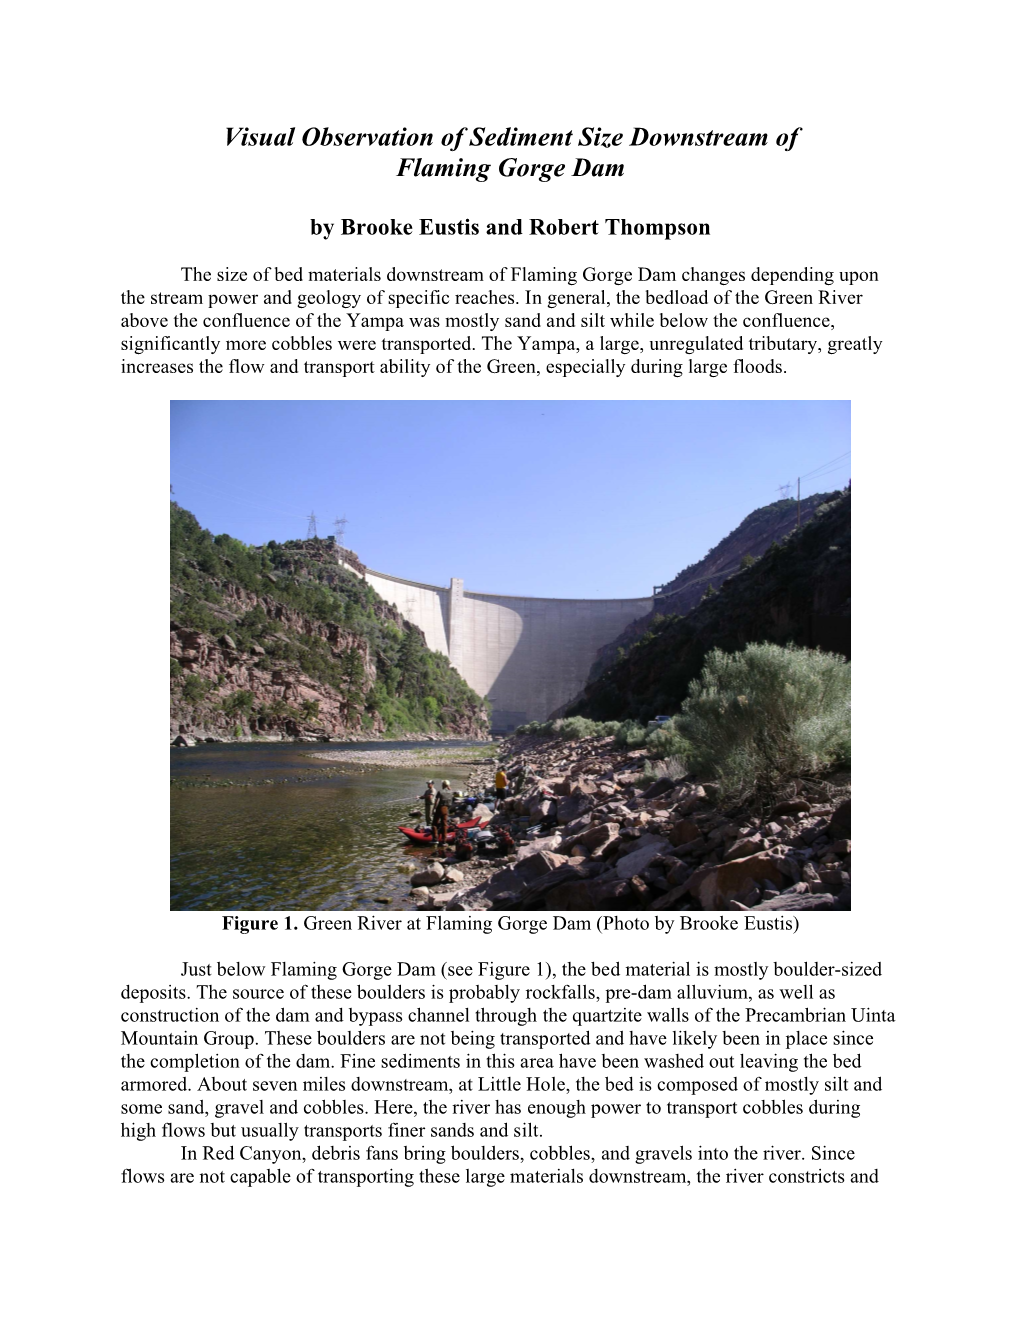 Visual Observation of Sediment Size Downstream of Flaming Gorge Dam